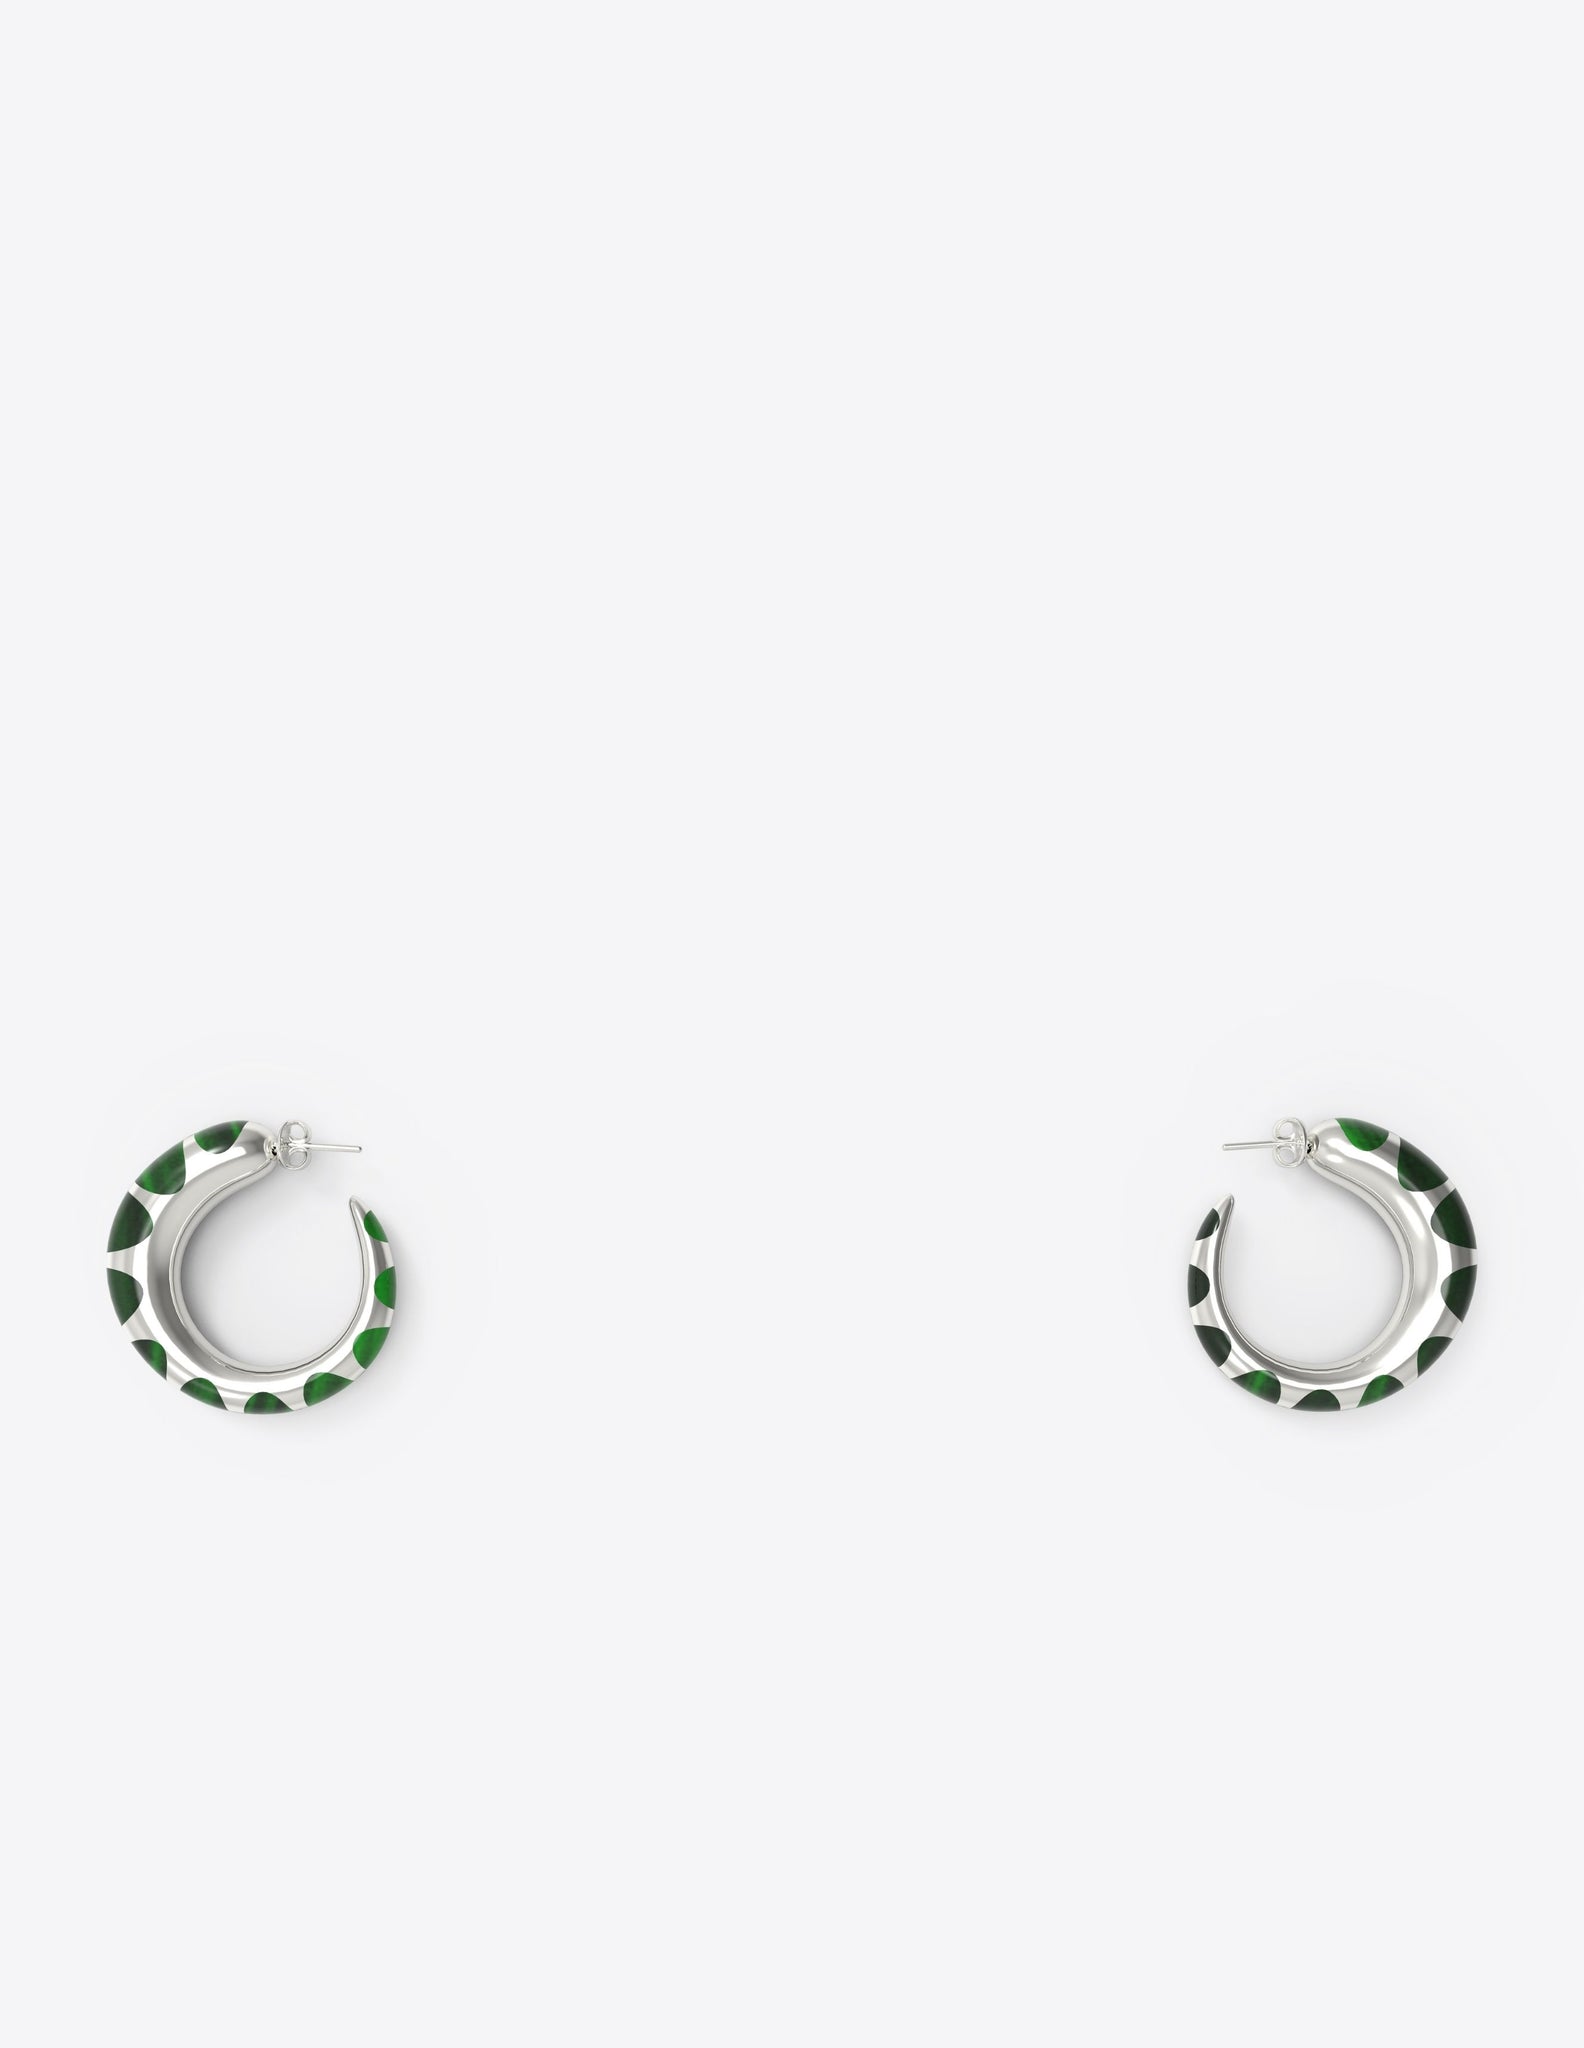 Tiny Khartoum Hoops with Striped Green Onyx Inlay in Sterling Silver